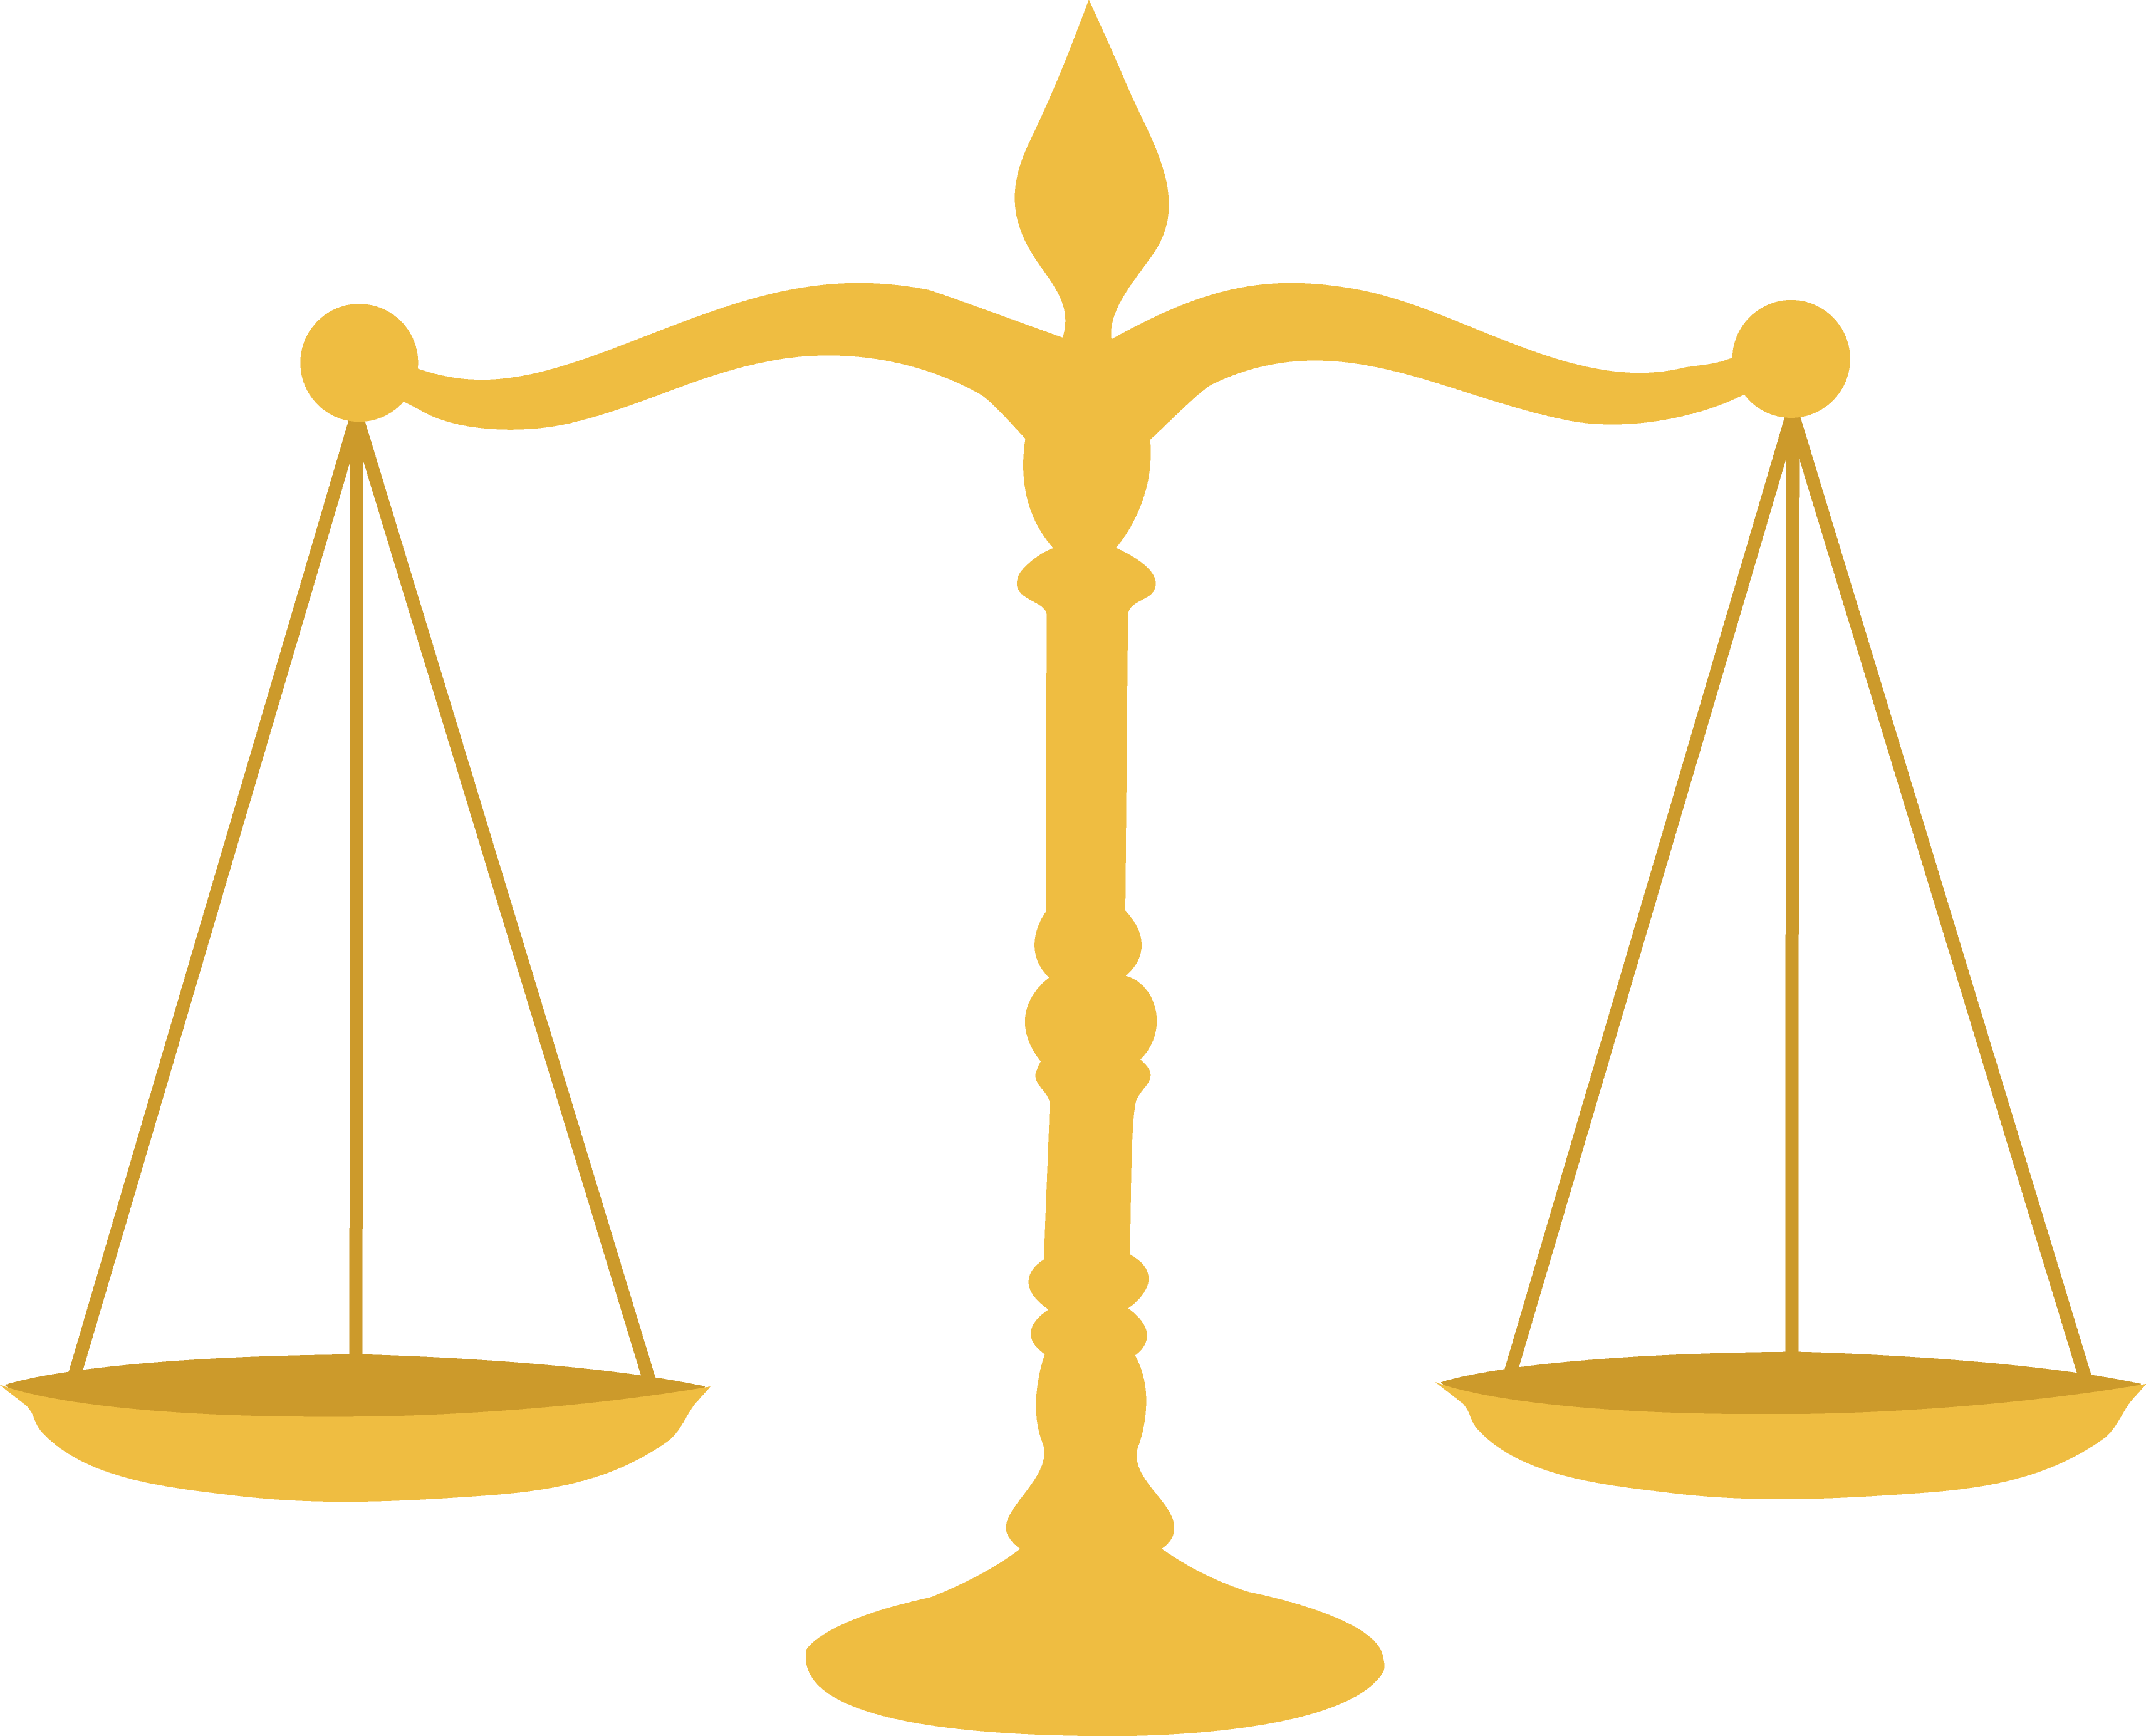 truth and justice clipart